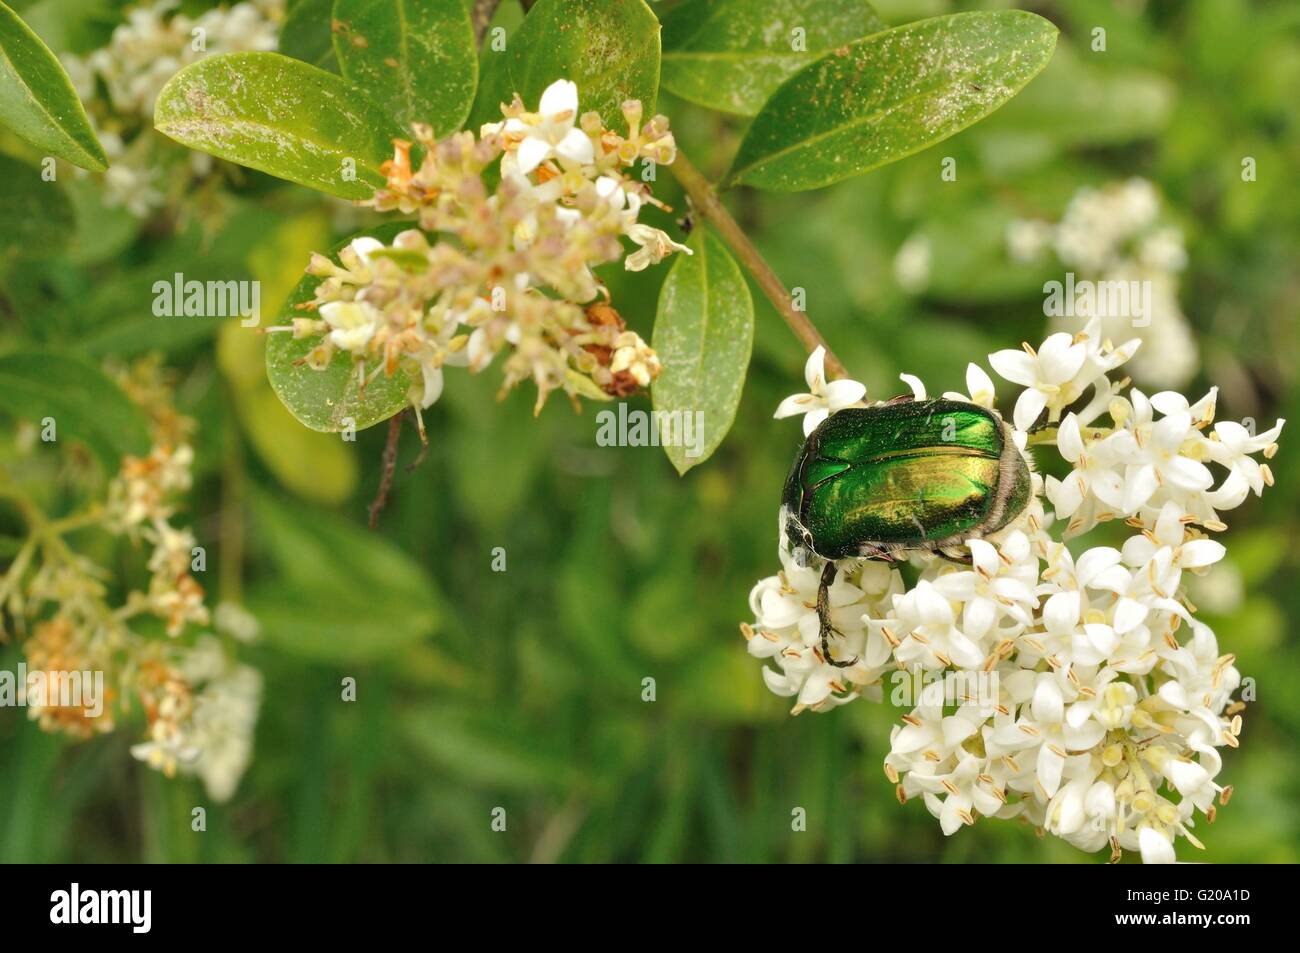 Green may-bug on a white flowers Stock Photo